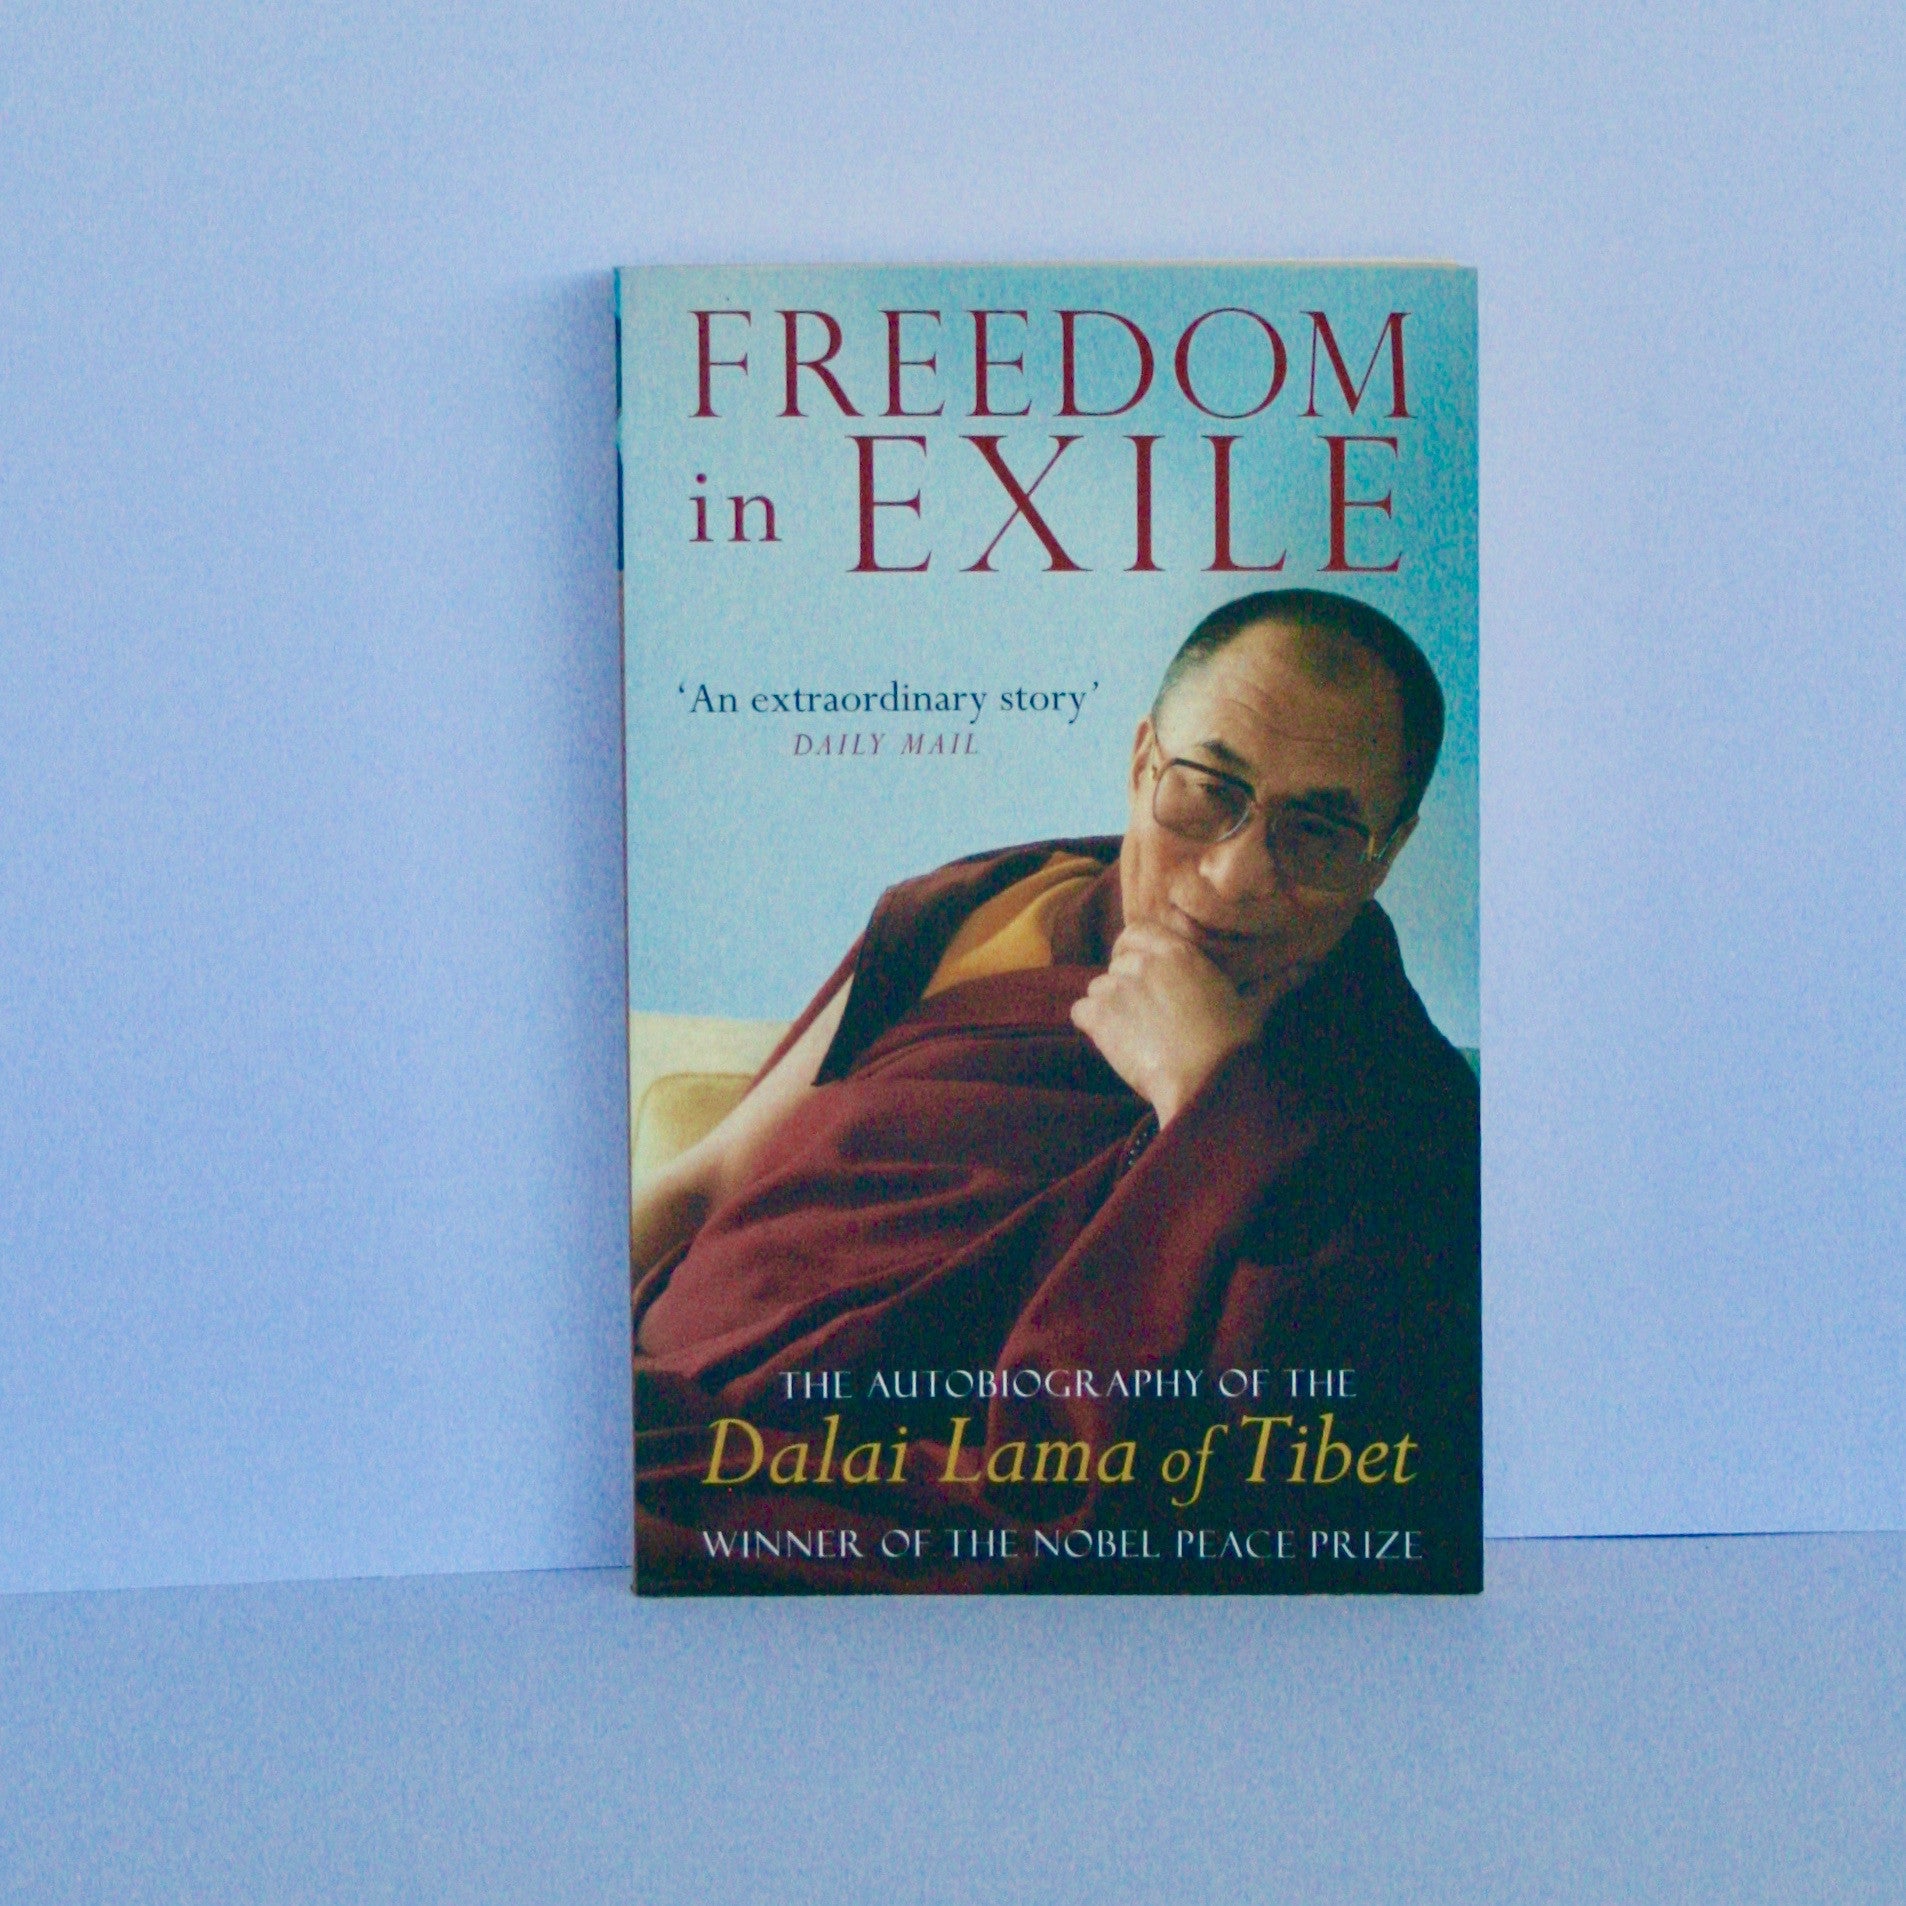 Freedom in Exile - The Autobiography of the Dalai Lama by HH 14th Dalai Lama of Tibet